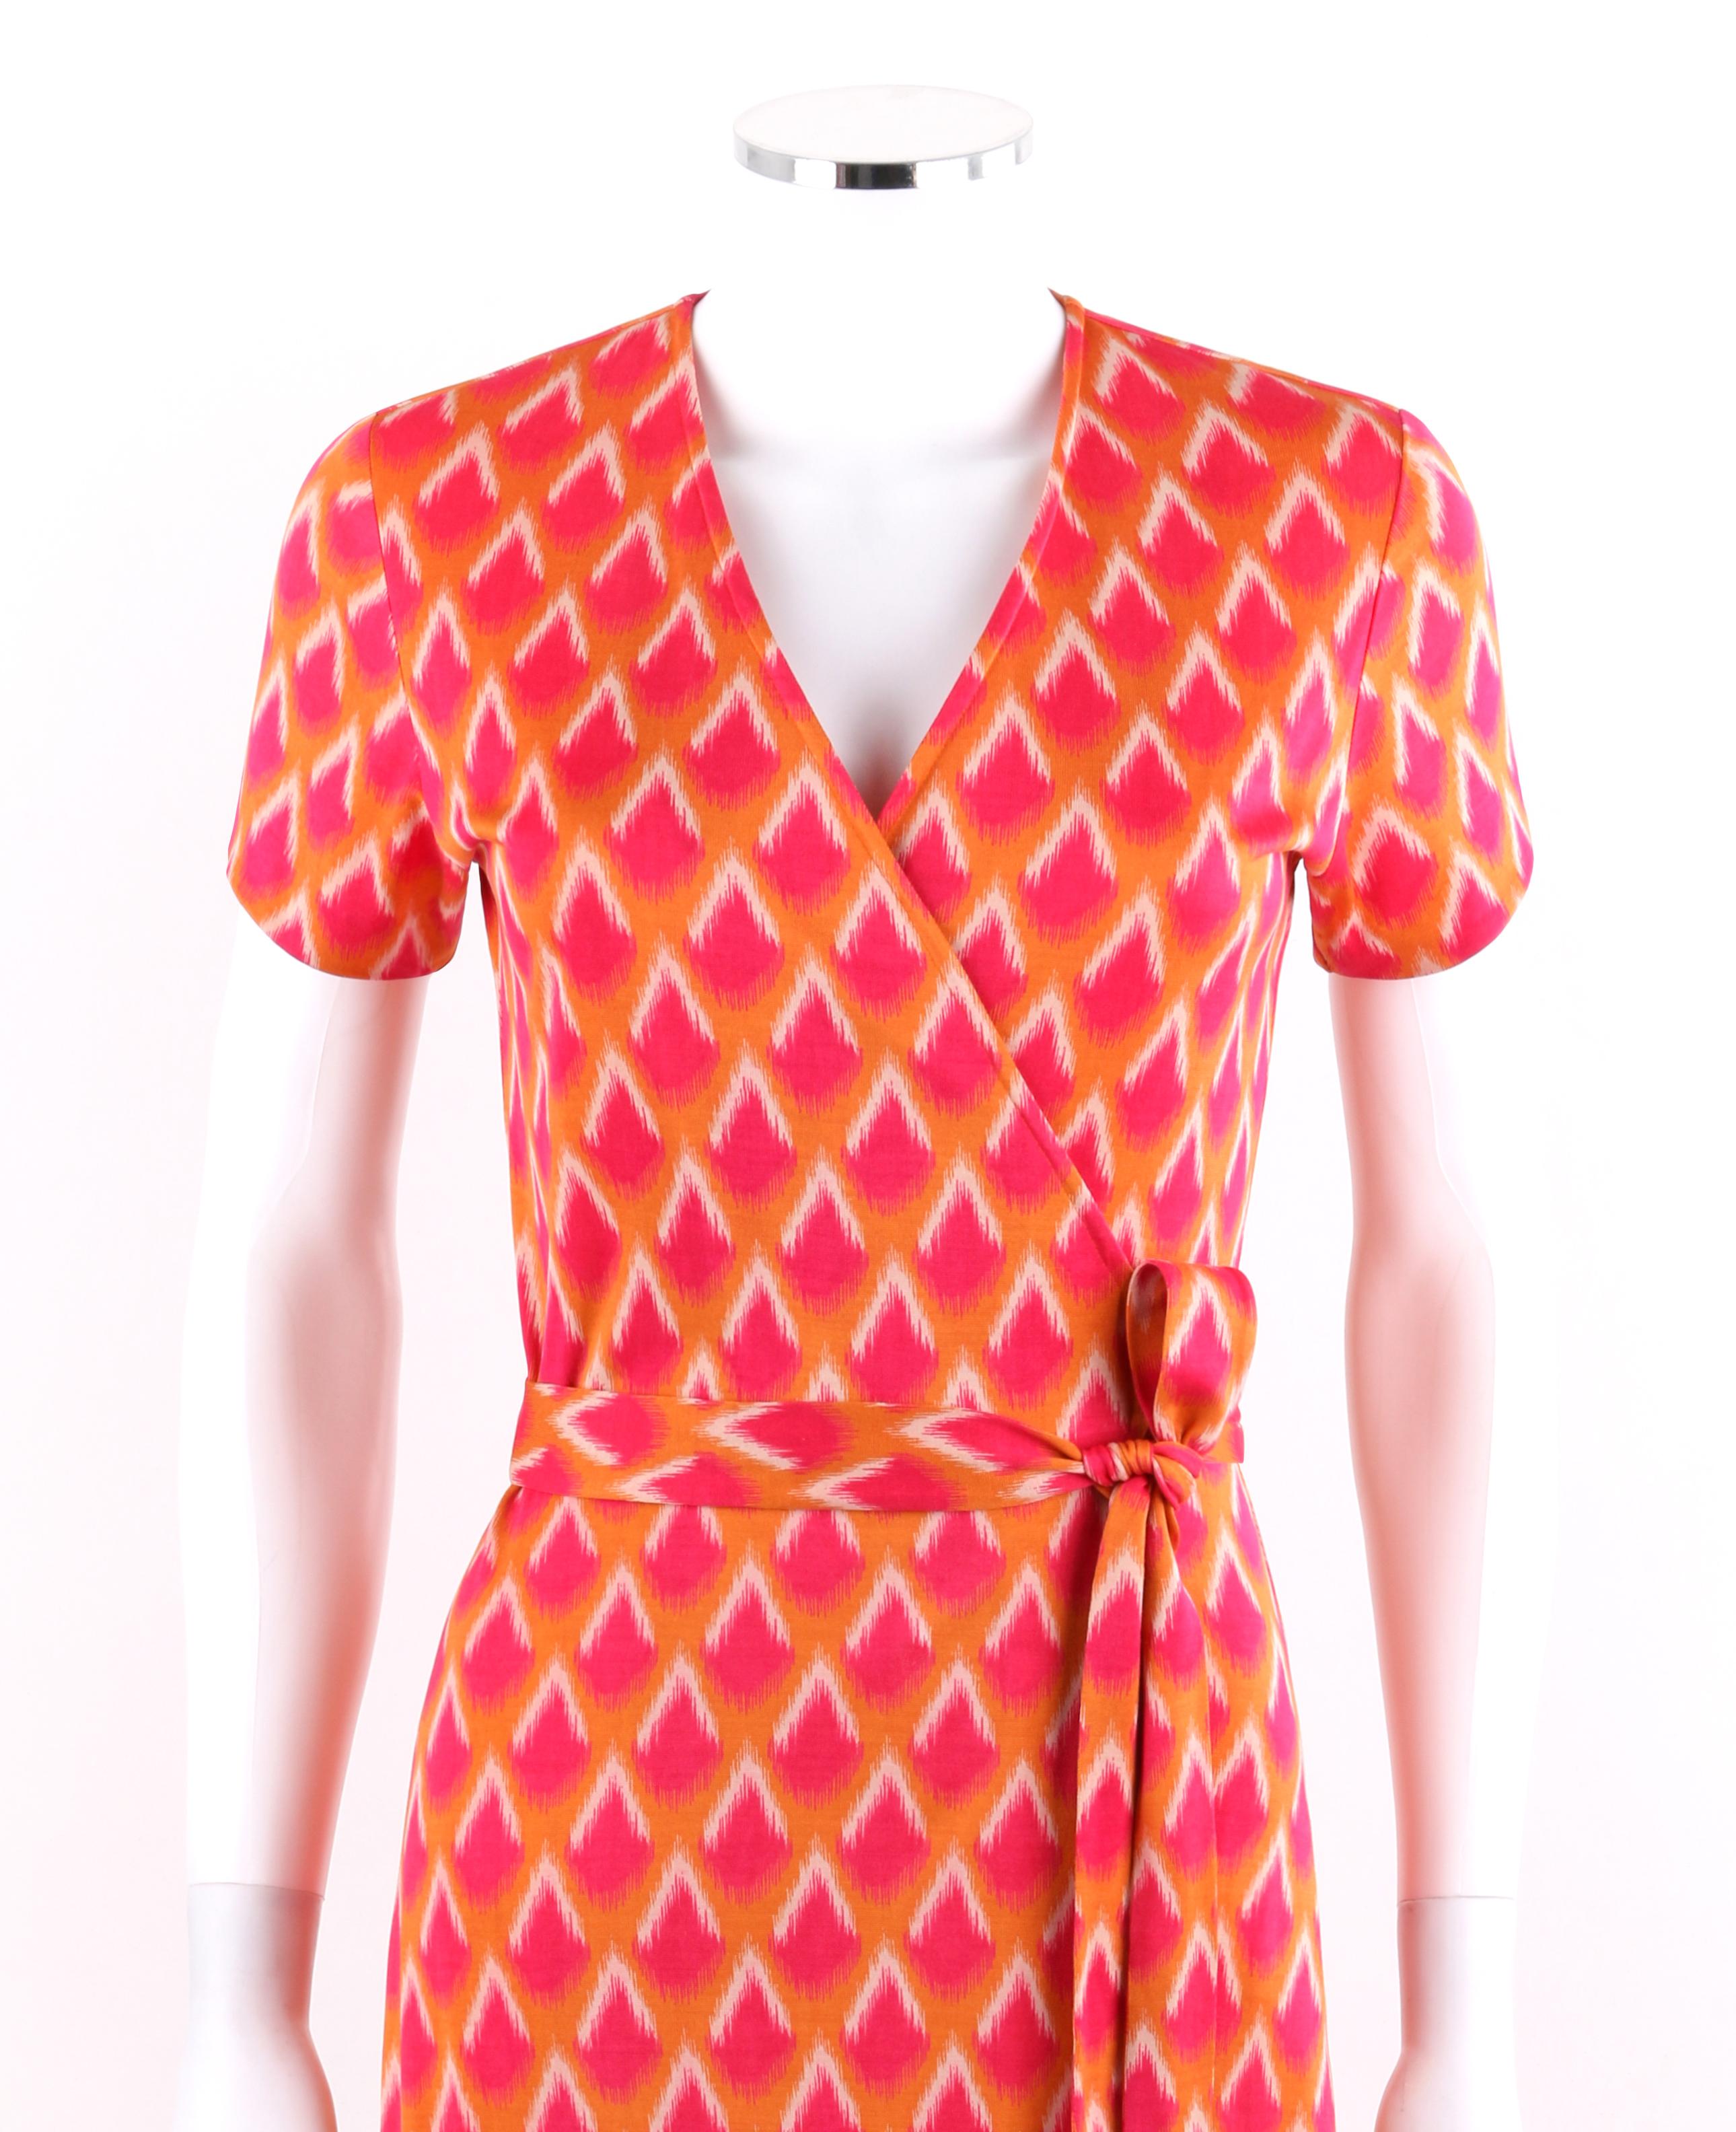 DIANE VON FURSTENBERG c.1970's DVF Abstract Print Silk Jersey Iconic Wrap Dress
 
Circa: c1970s
Label(s):  Diane Von Furstenberg / Neiman Marcus Exclusive 
Style: Wrap dress
Color(s): Shades of orange, red, and white
Lined: No
Marked Fabric Content: